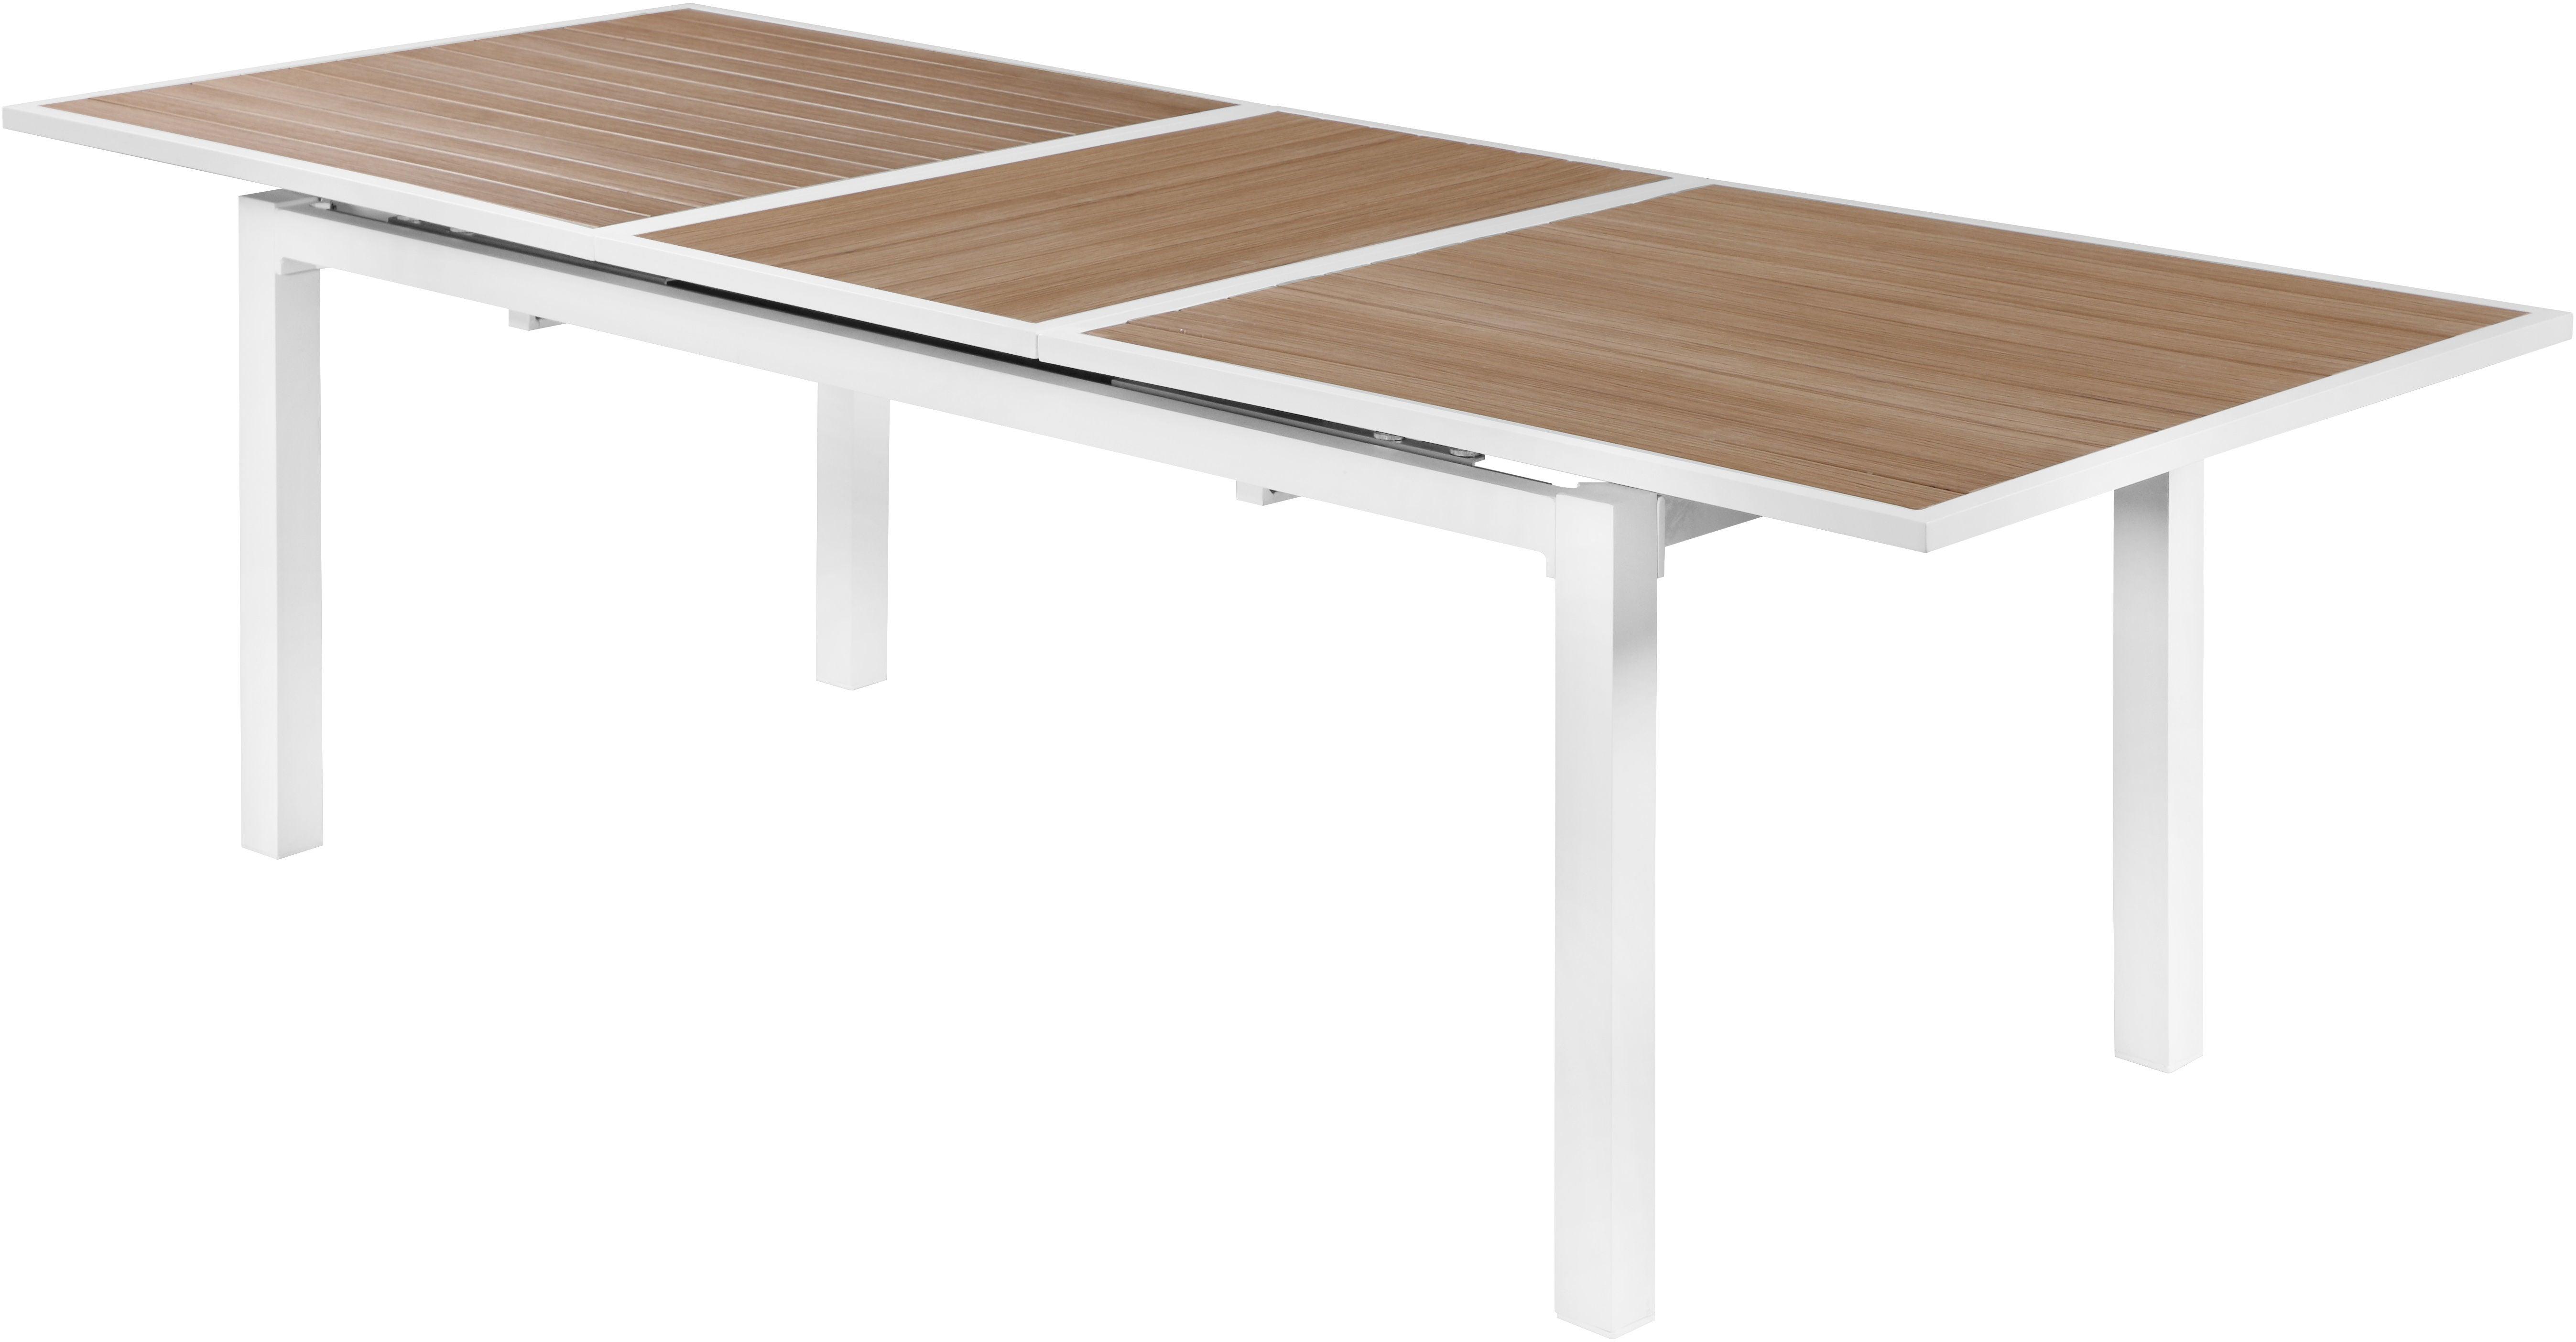 Meridian Furniture - Nizuc - Outdoor Patio Extendable Dining Table - 5th Avenue Furniture